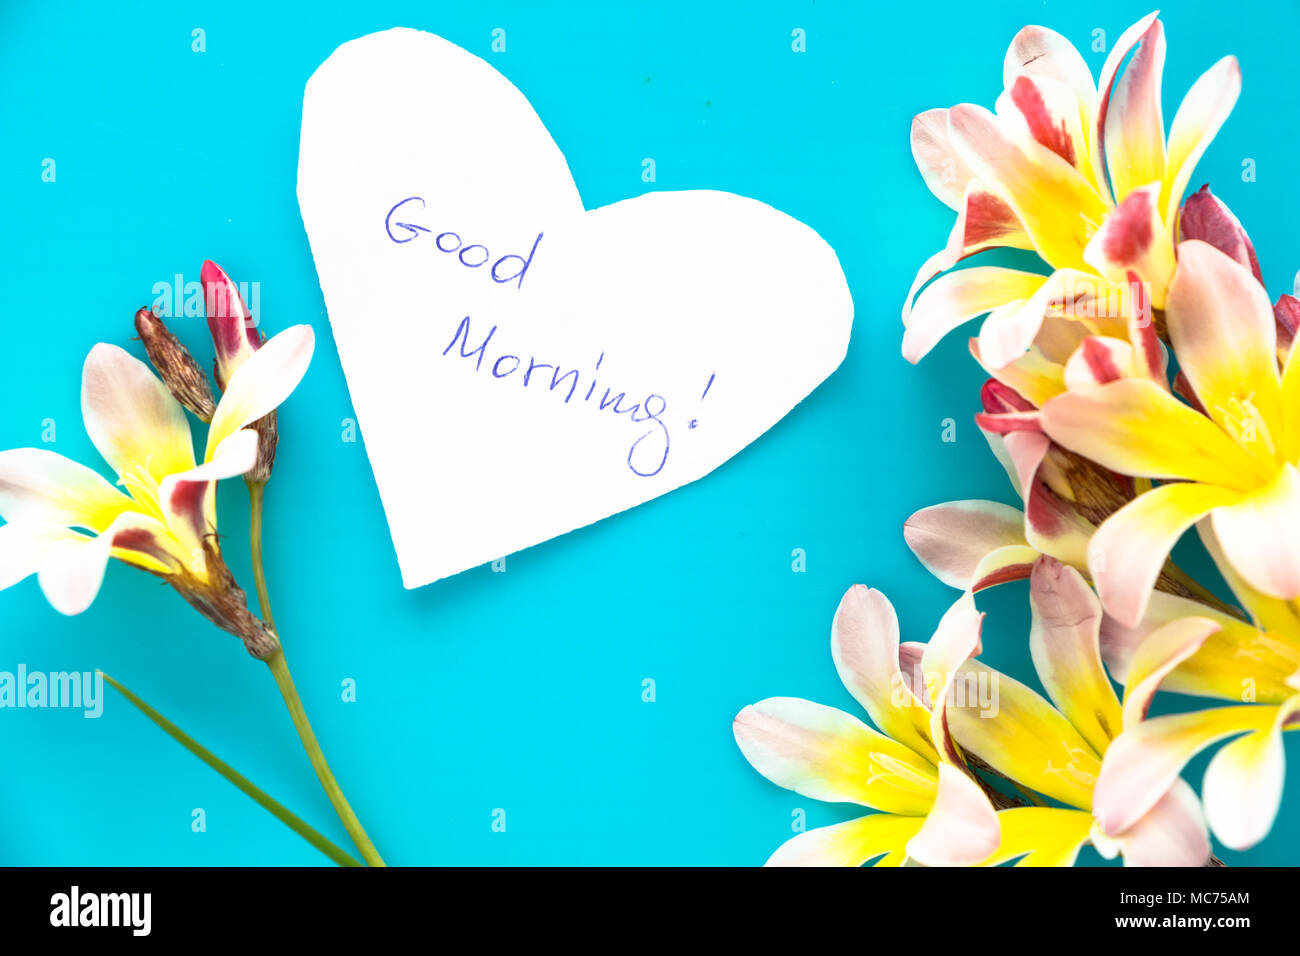 Note in shape of heart with words Good Morning, with flowers on ...